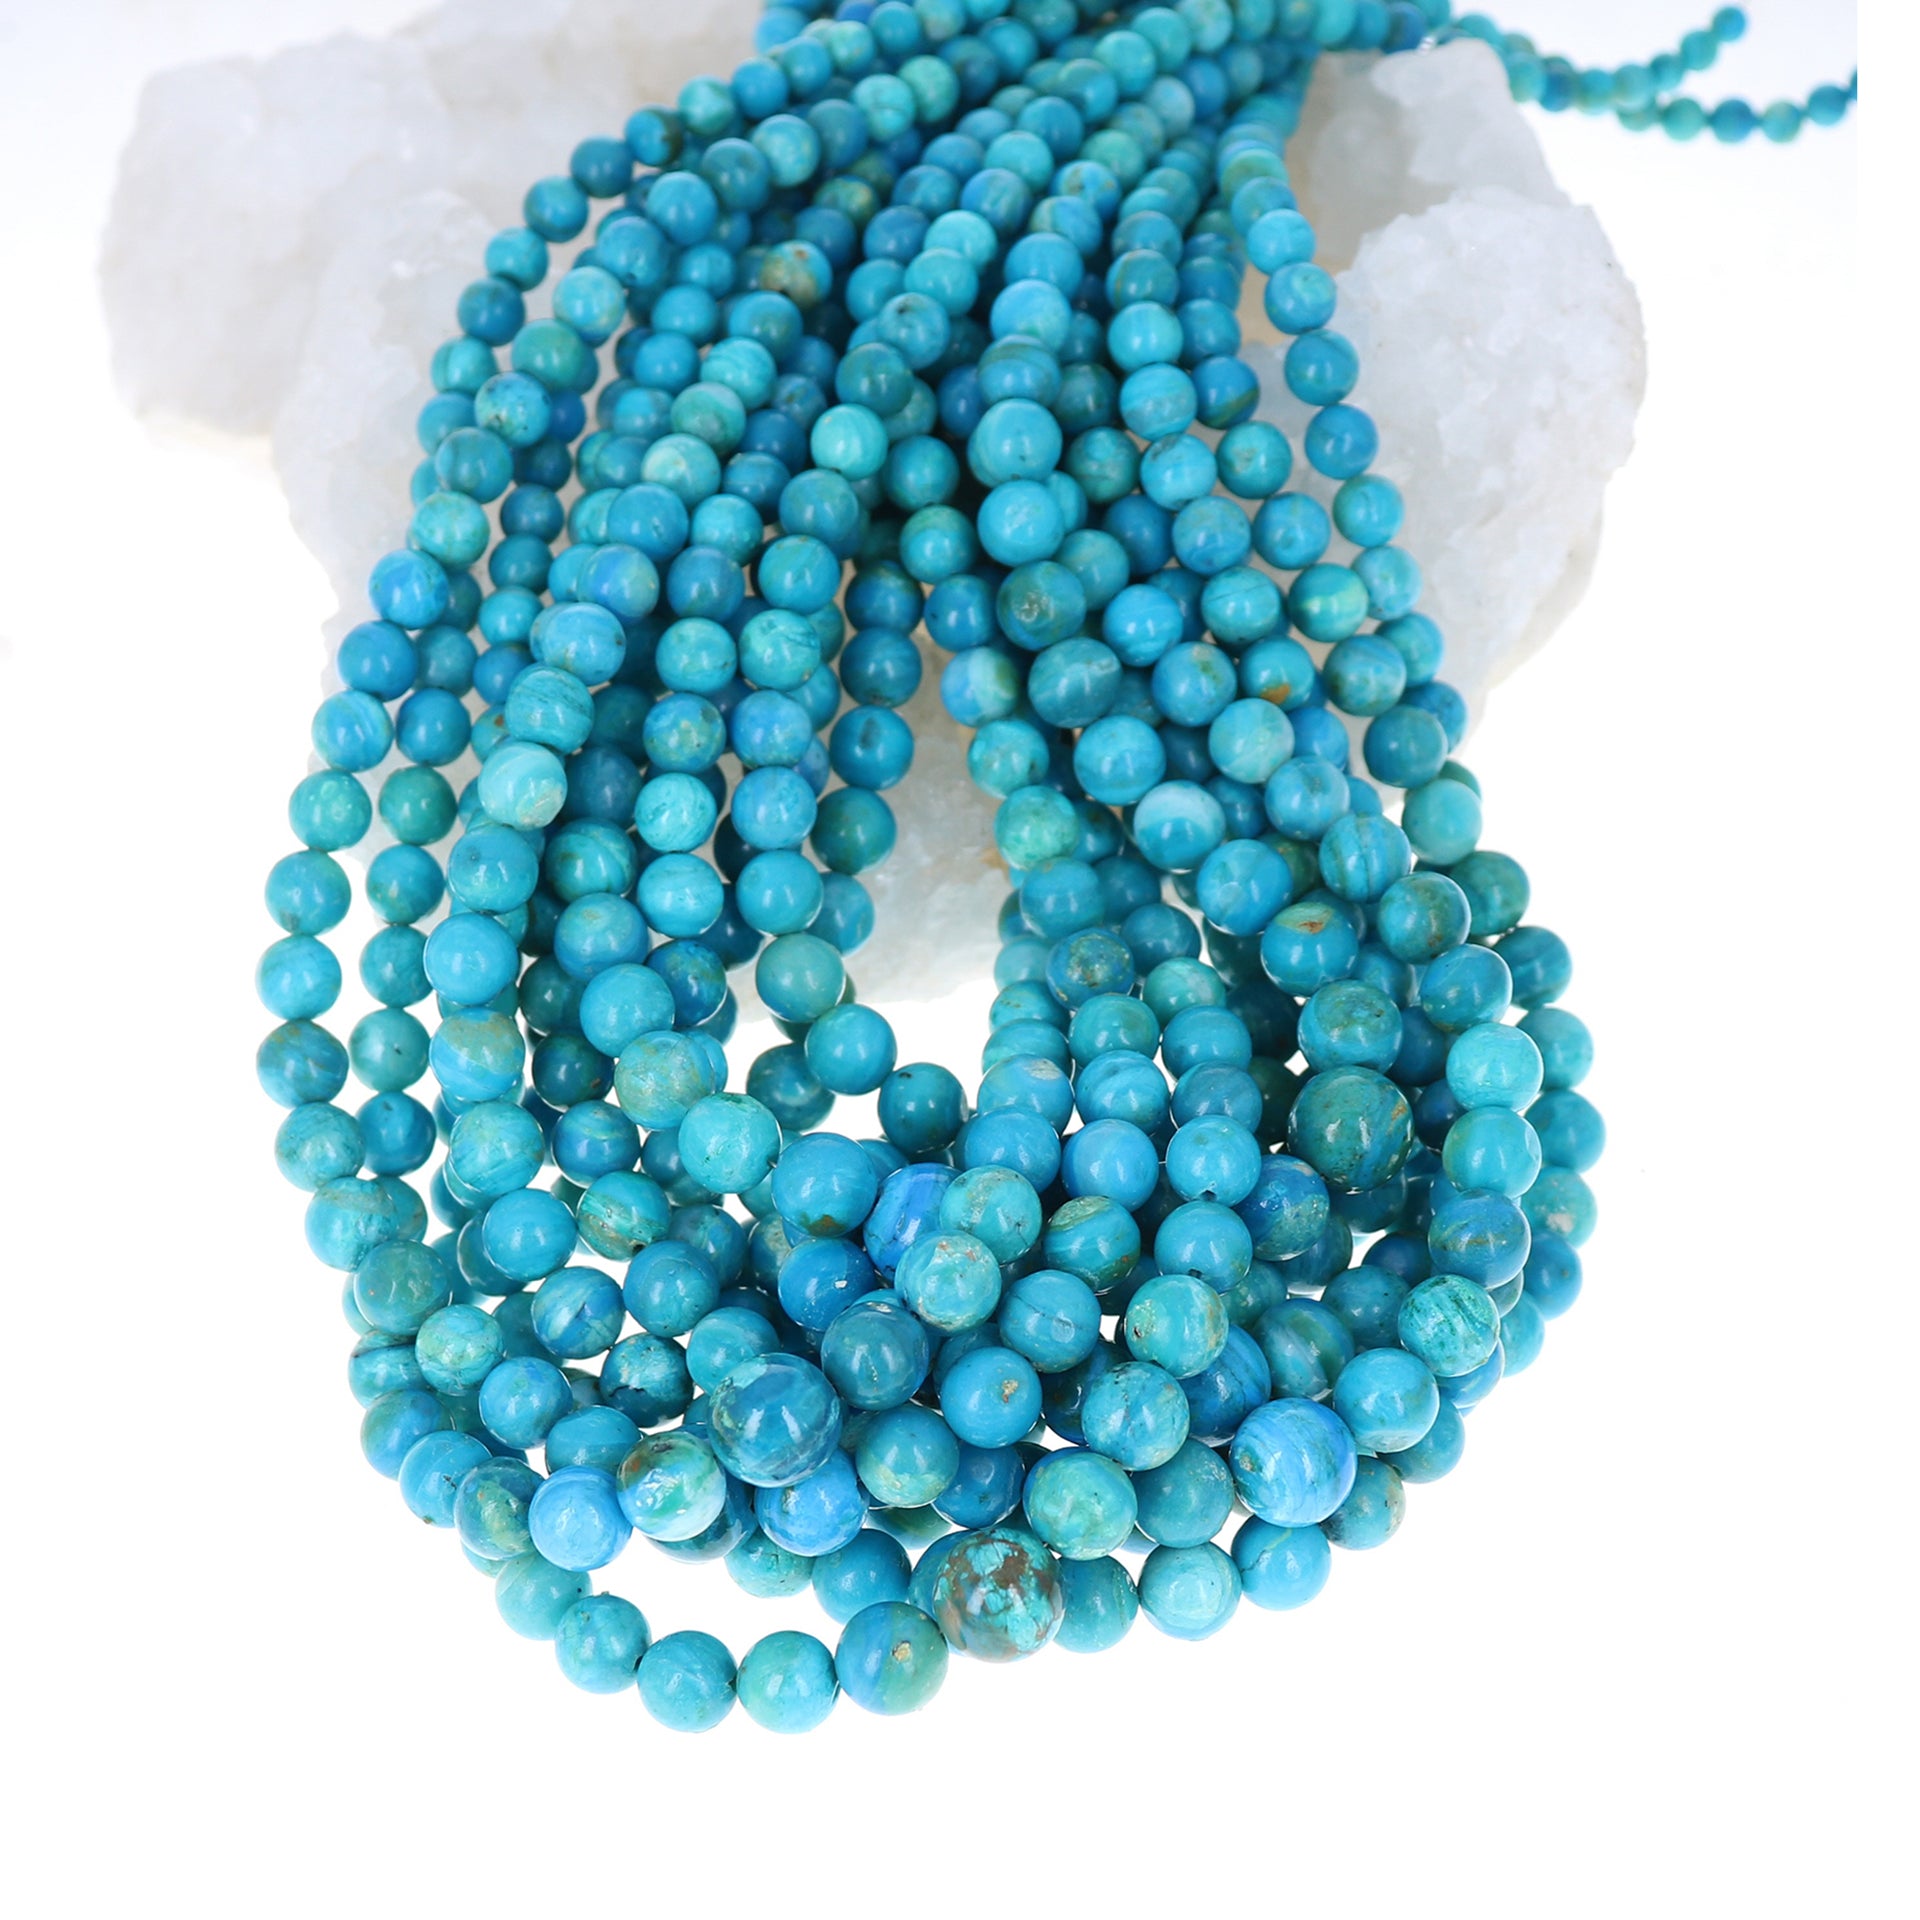 Gorgeous PERUVIAN OPAL Beads Ethereal Blue 6-16mm 10 Beads